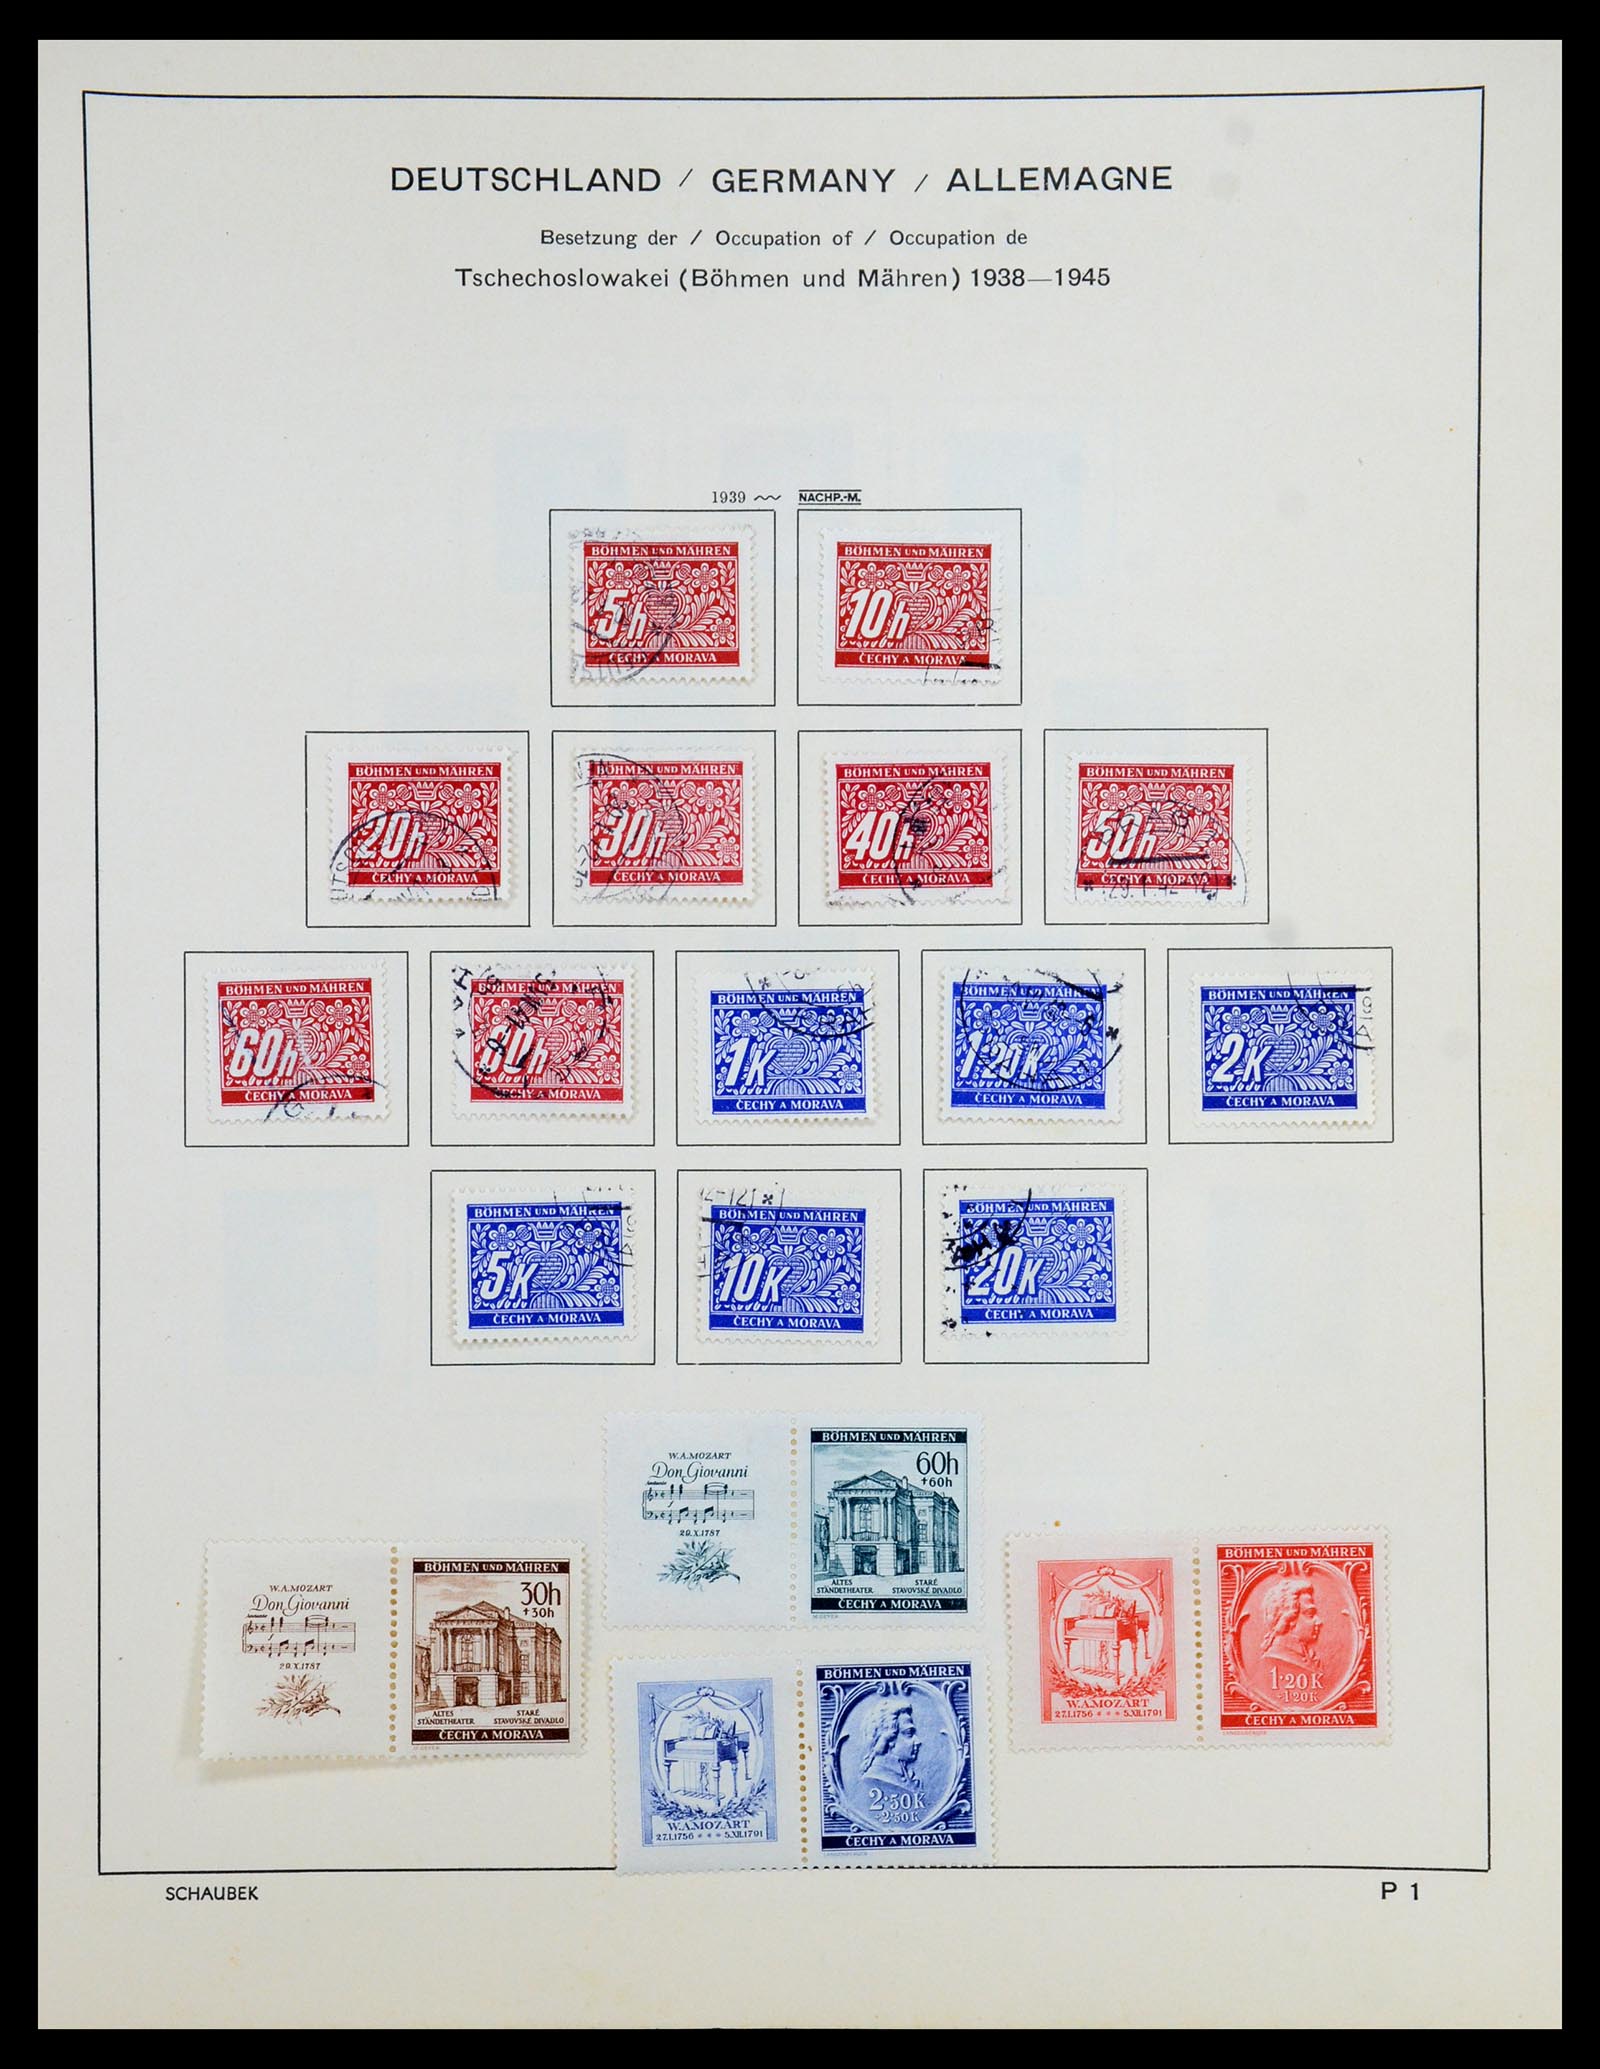 35964 029 - Stamp collection 35964 Germany occupations WW II 1939-1945.